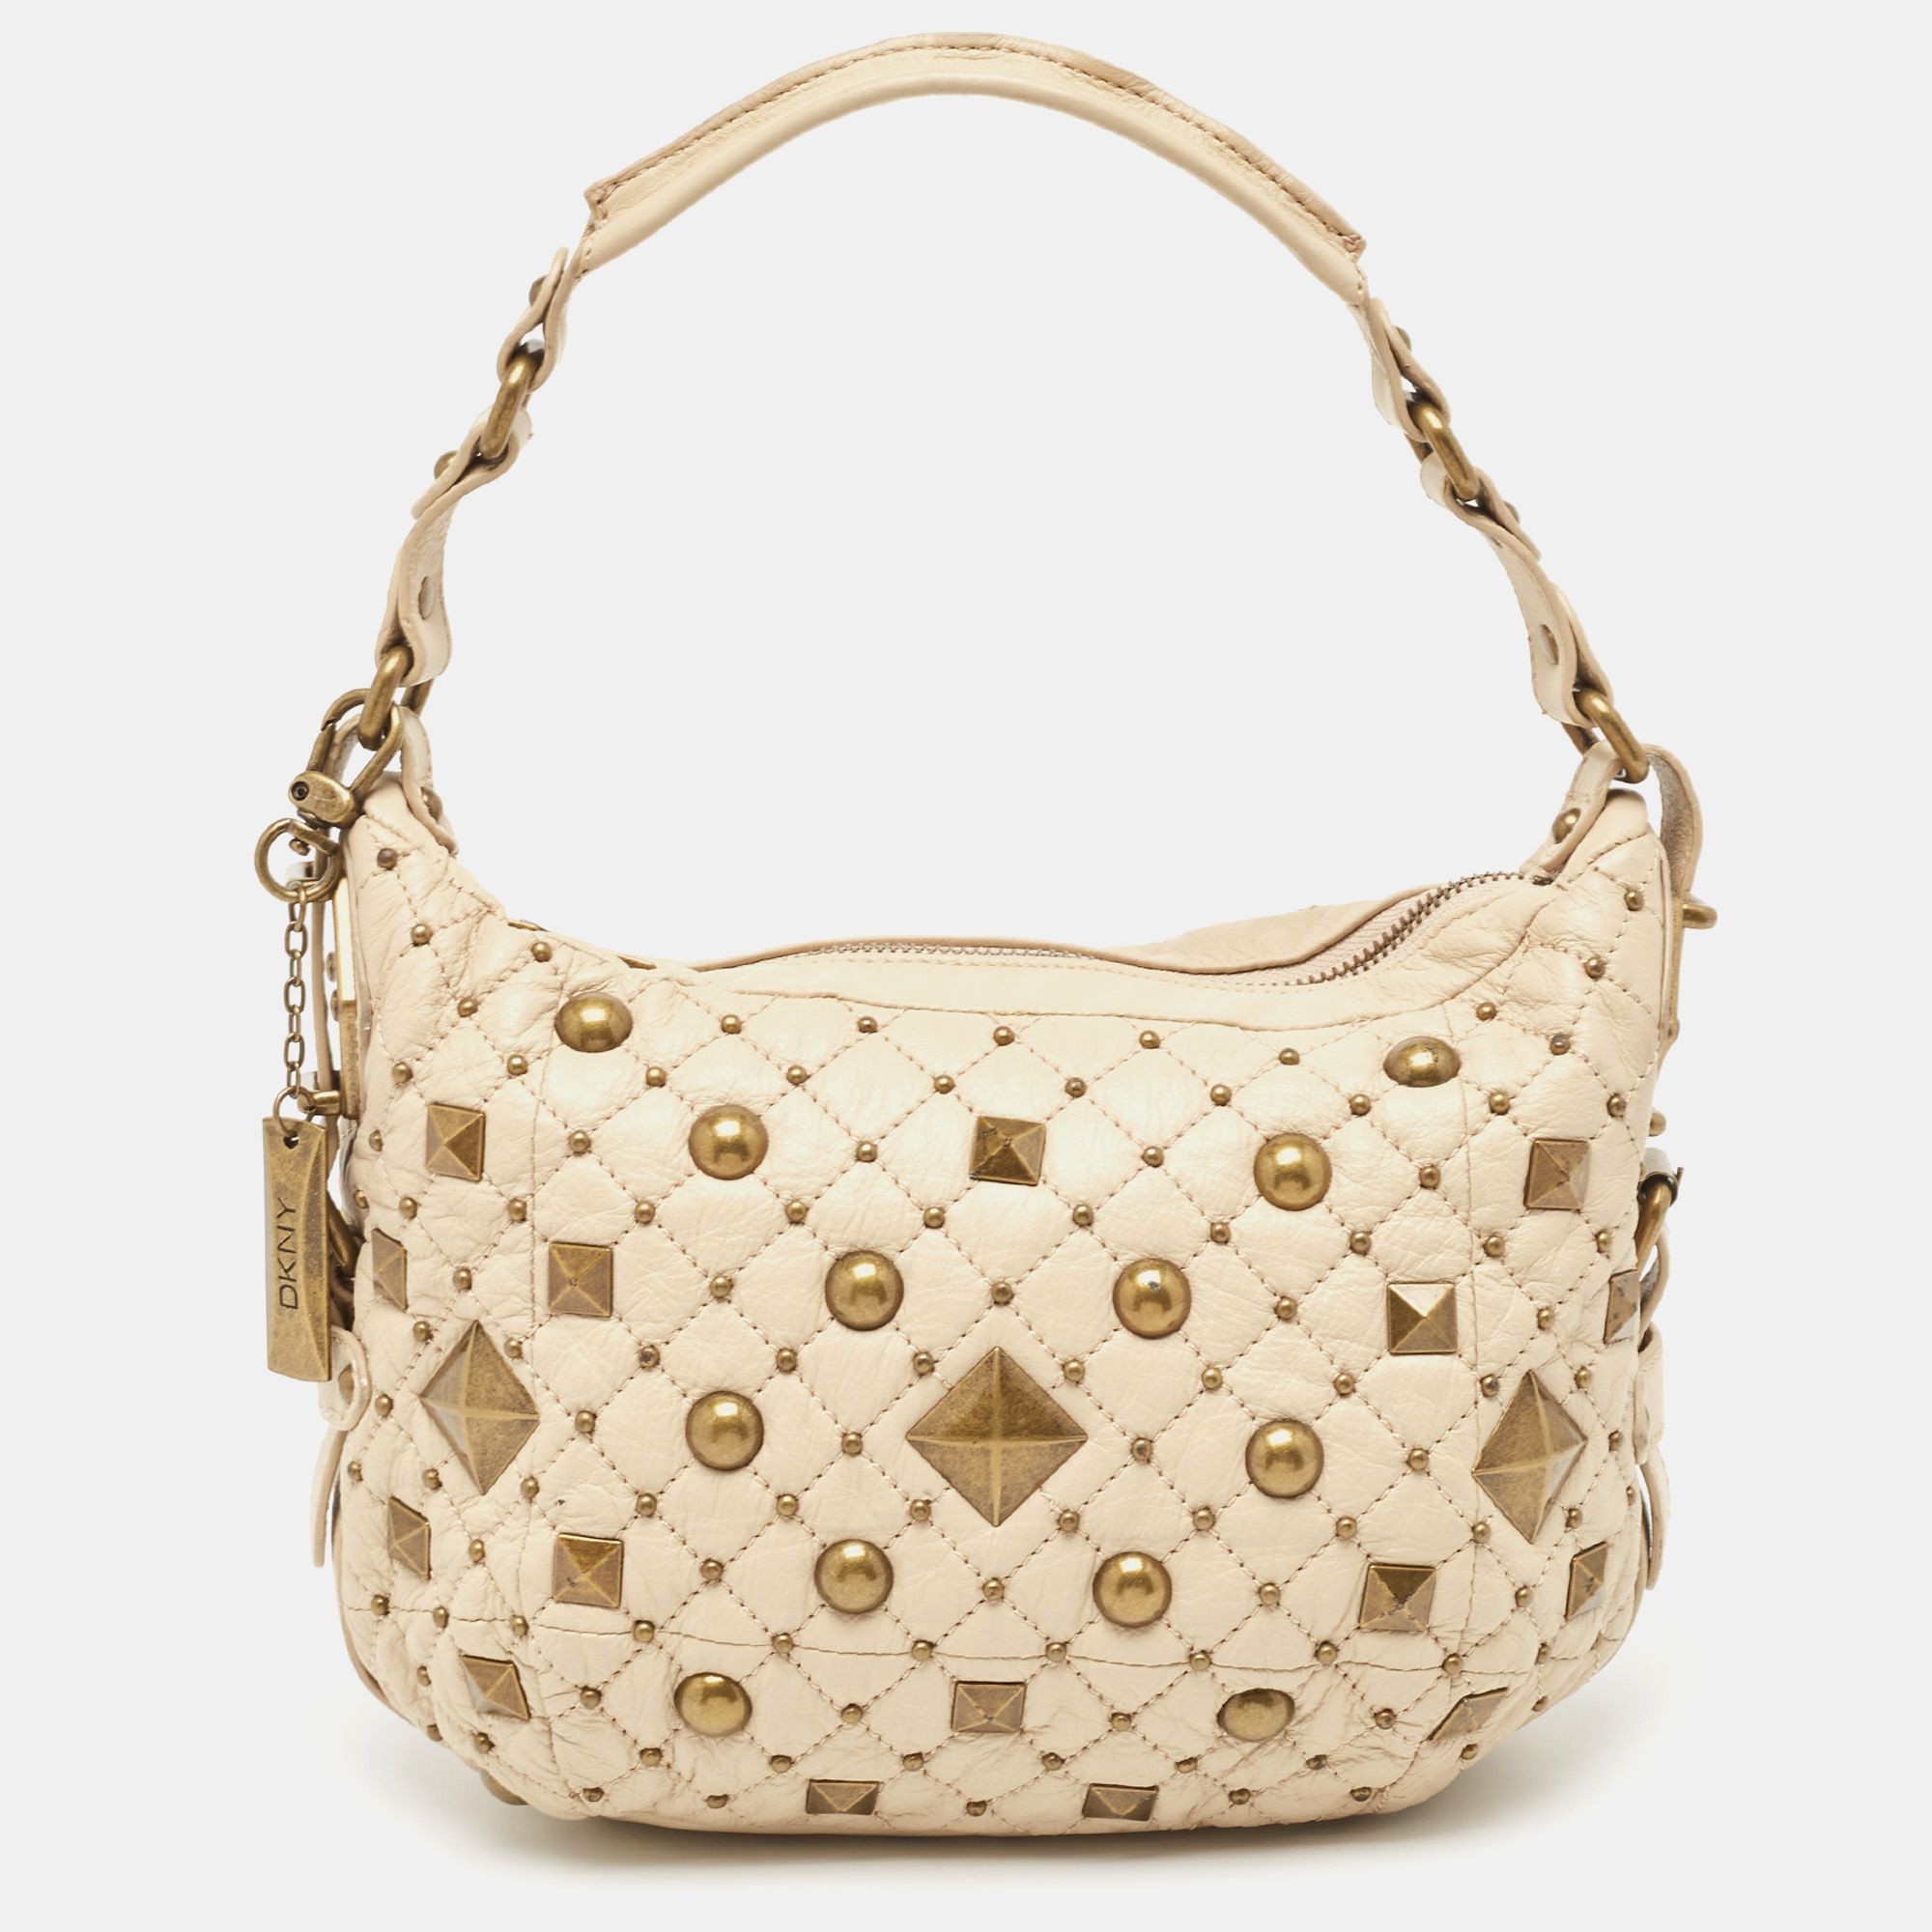 Dkny beige quilted leather studded hobo